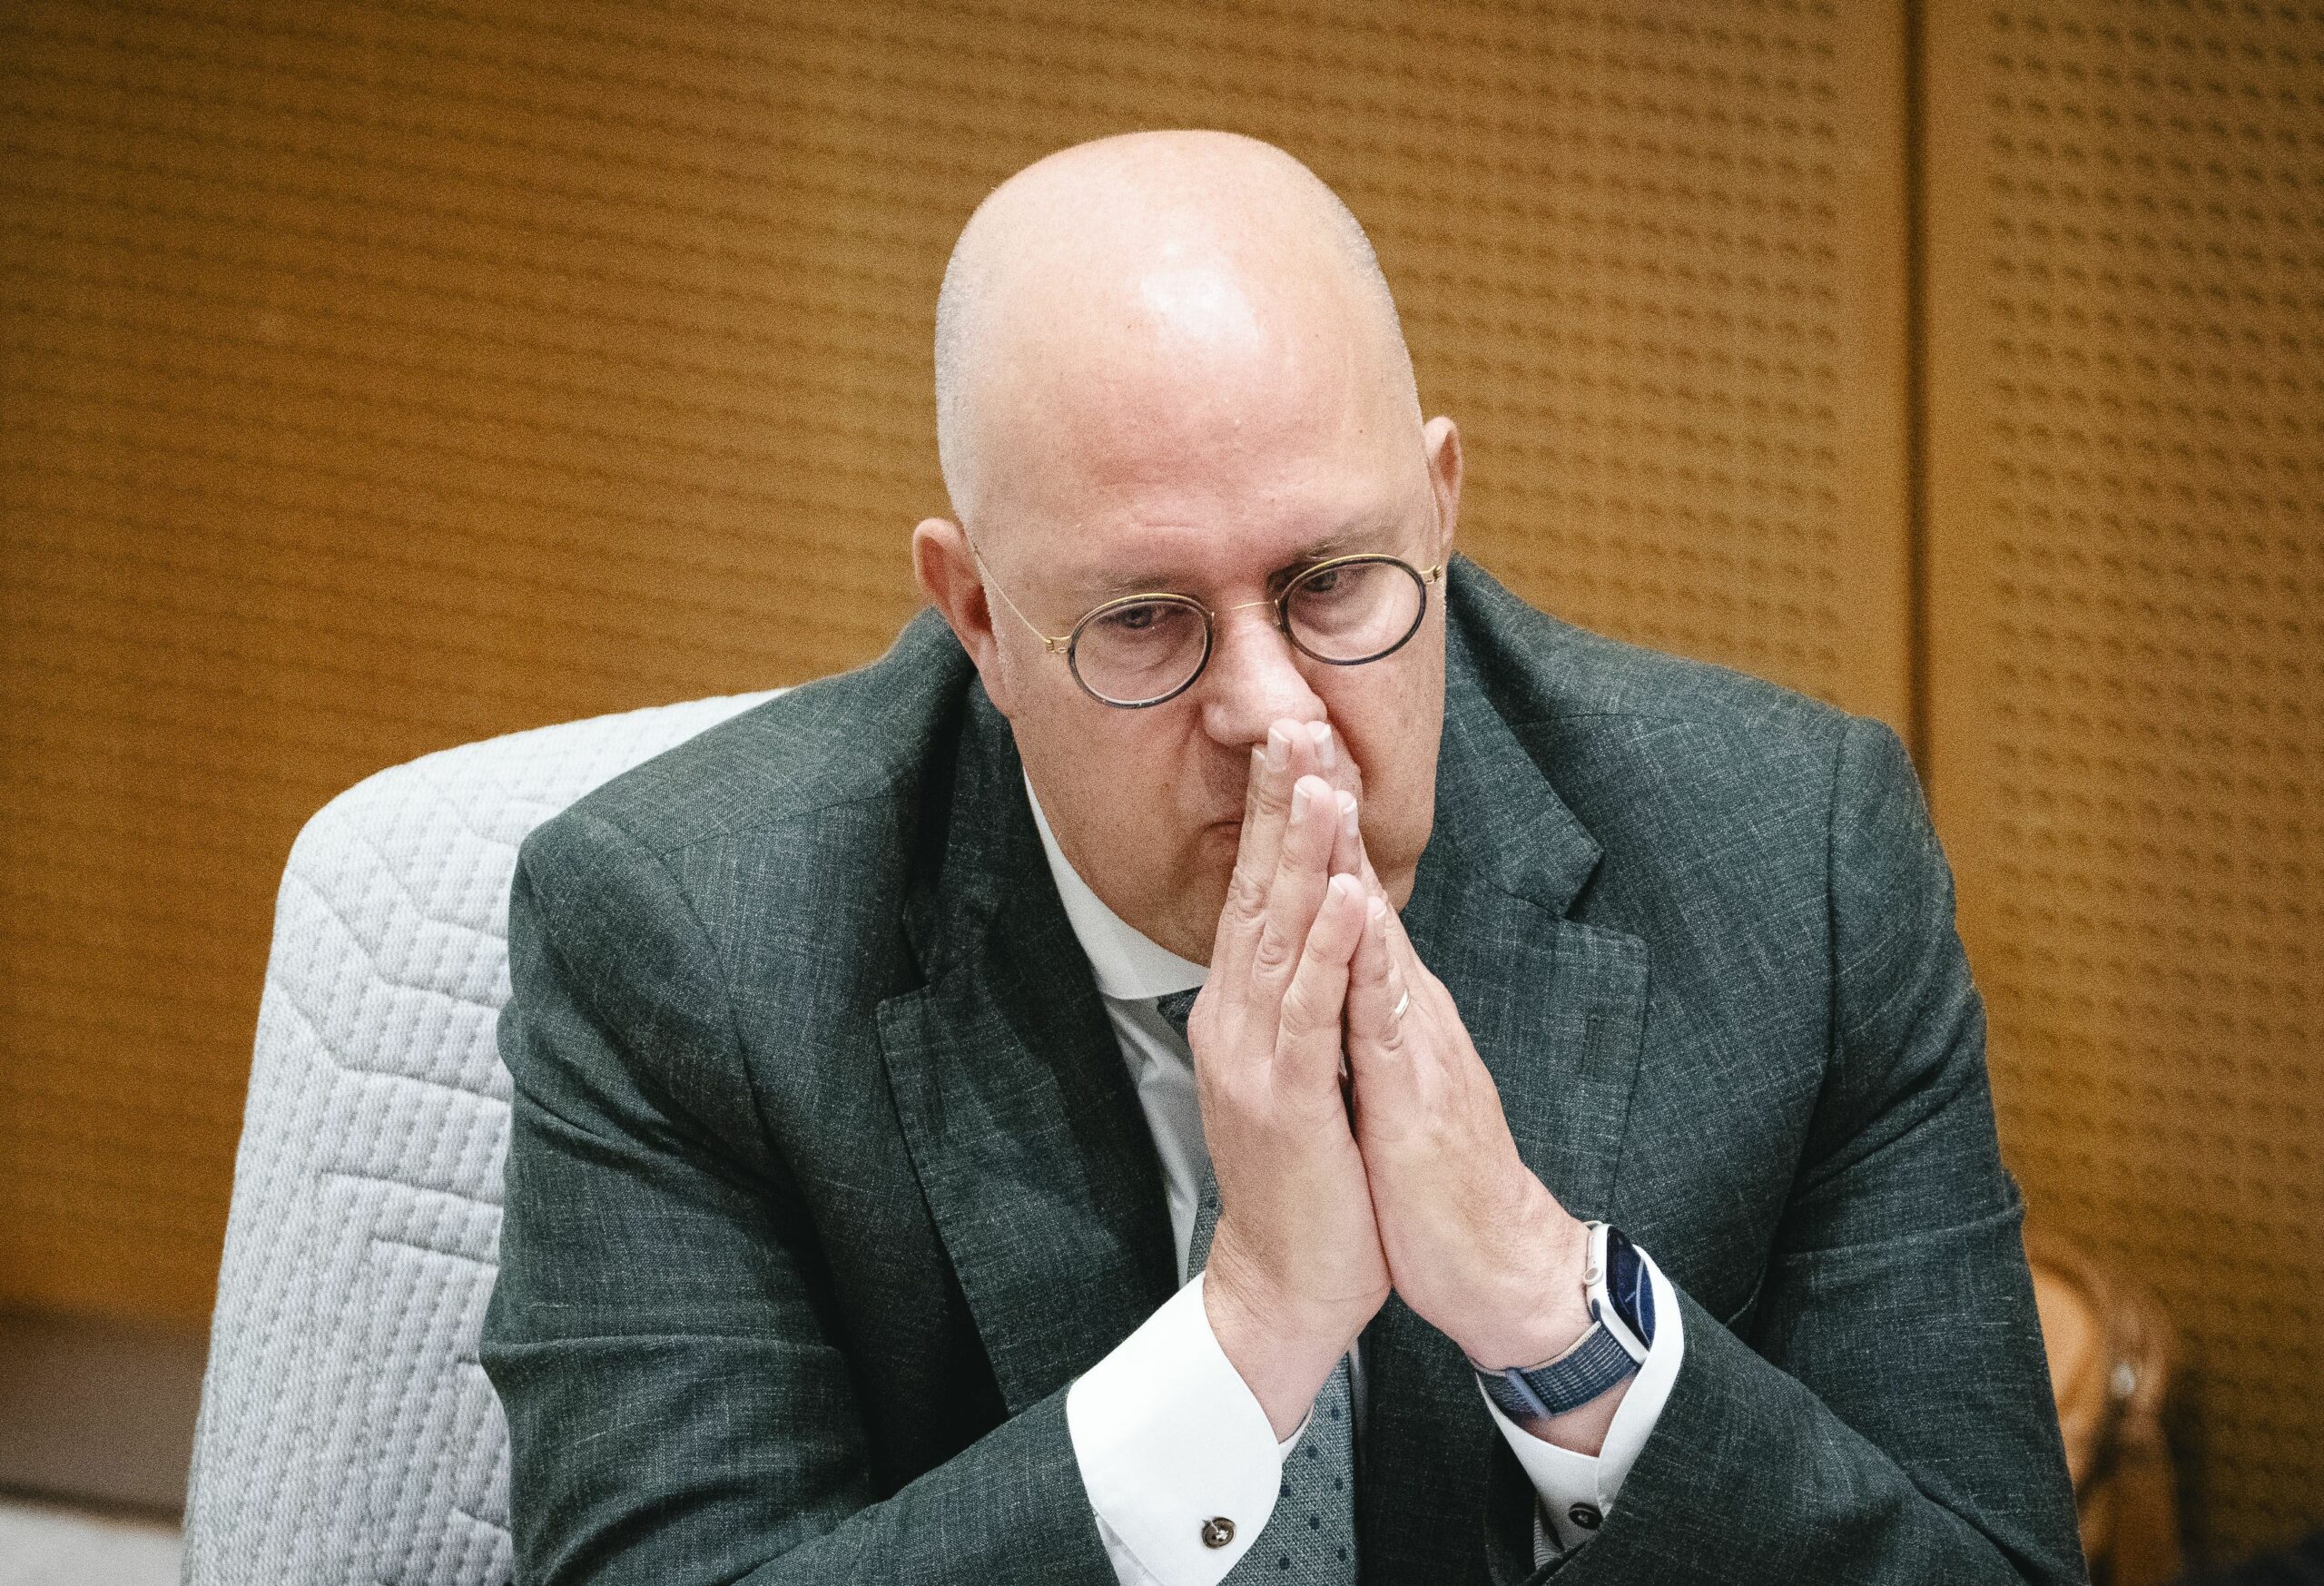 Den Bosch mayor won’t face charges over Moroccan comment